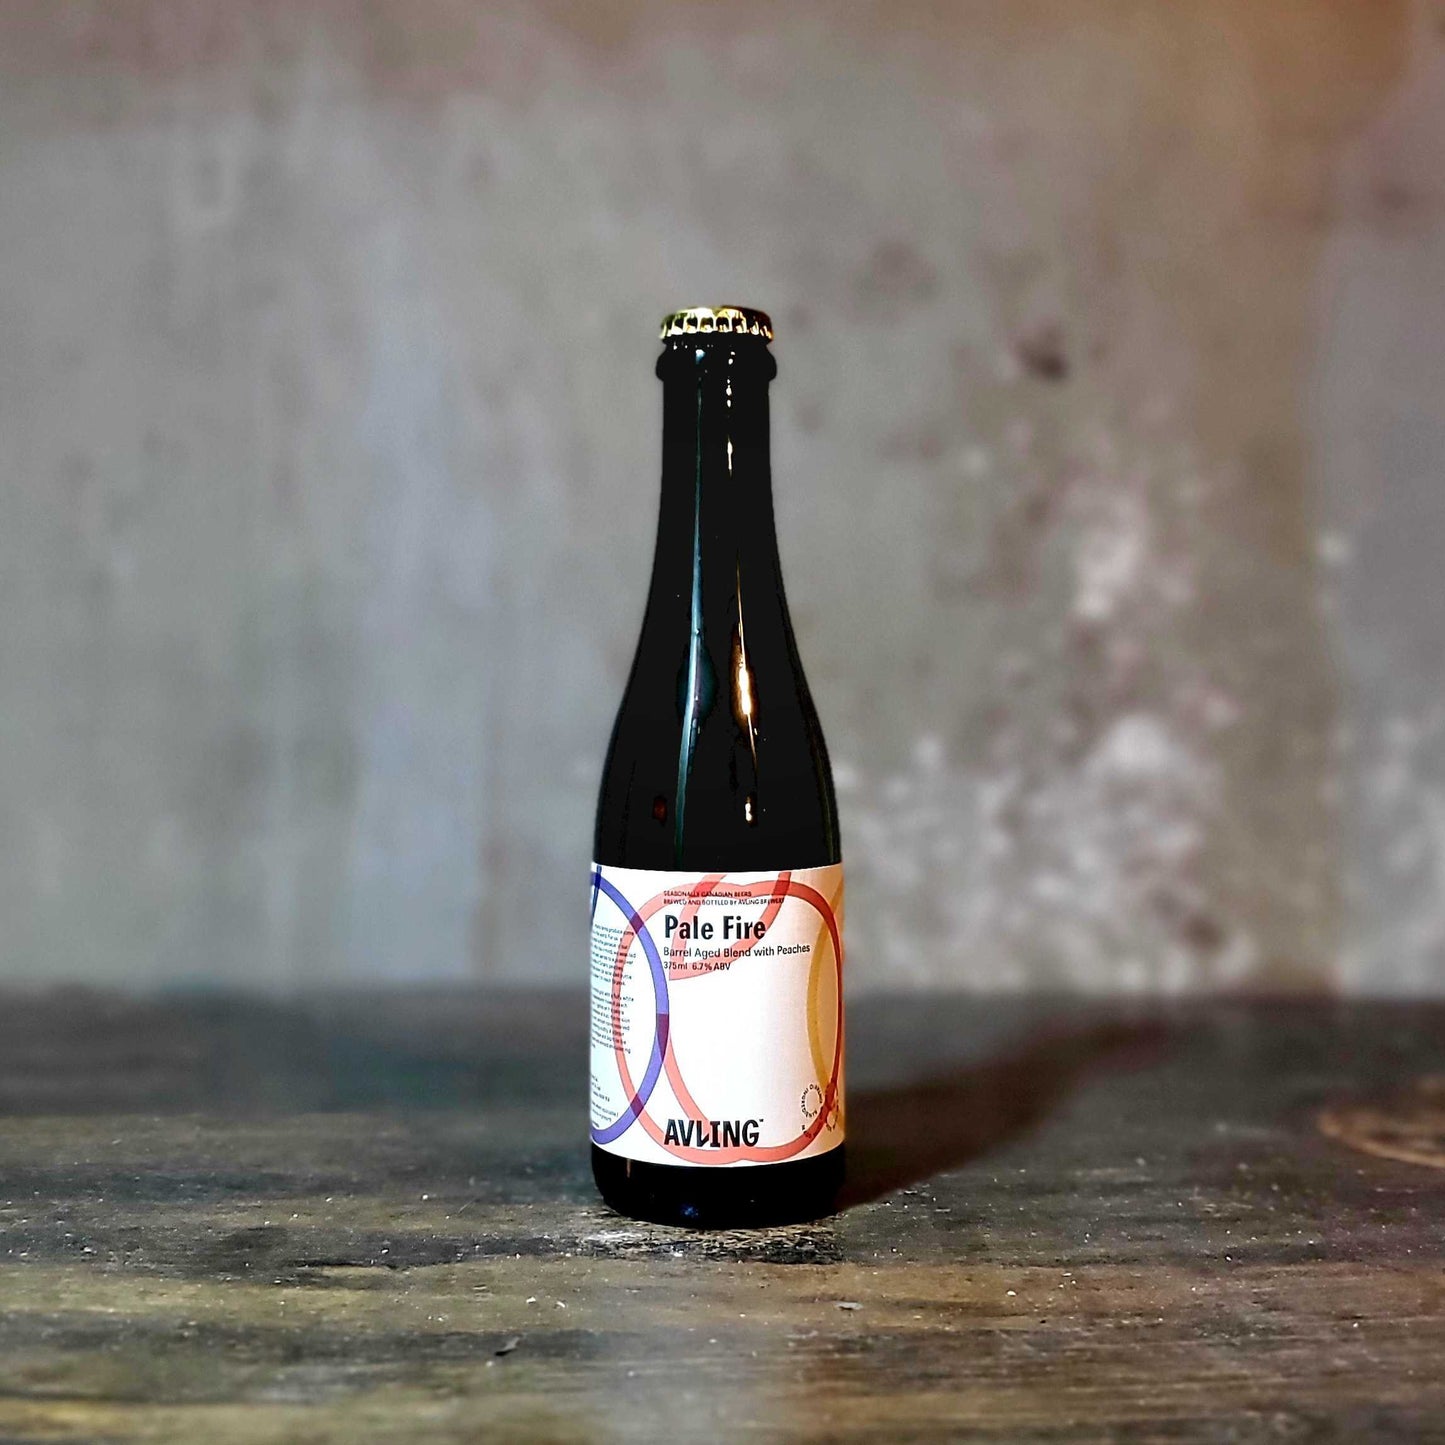 Avling "Pale Fire" Barrel-Aged Blend with Peaches